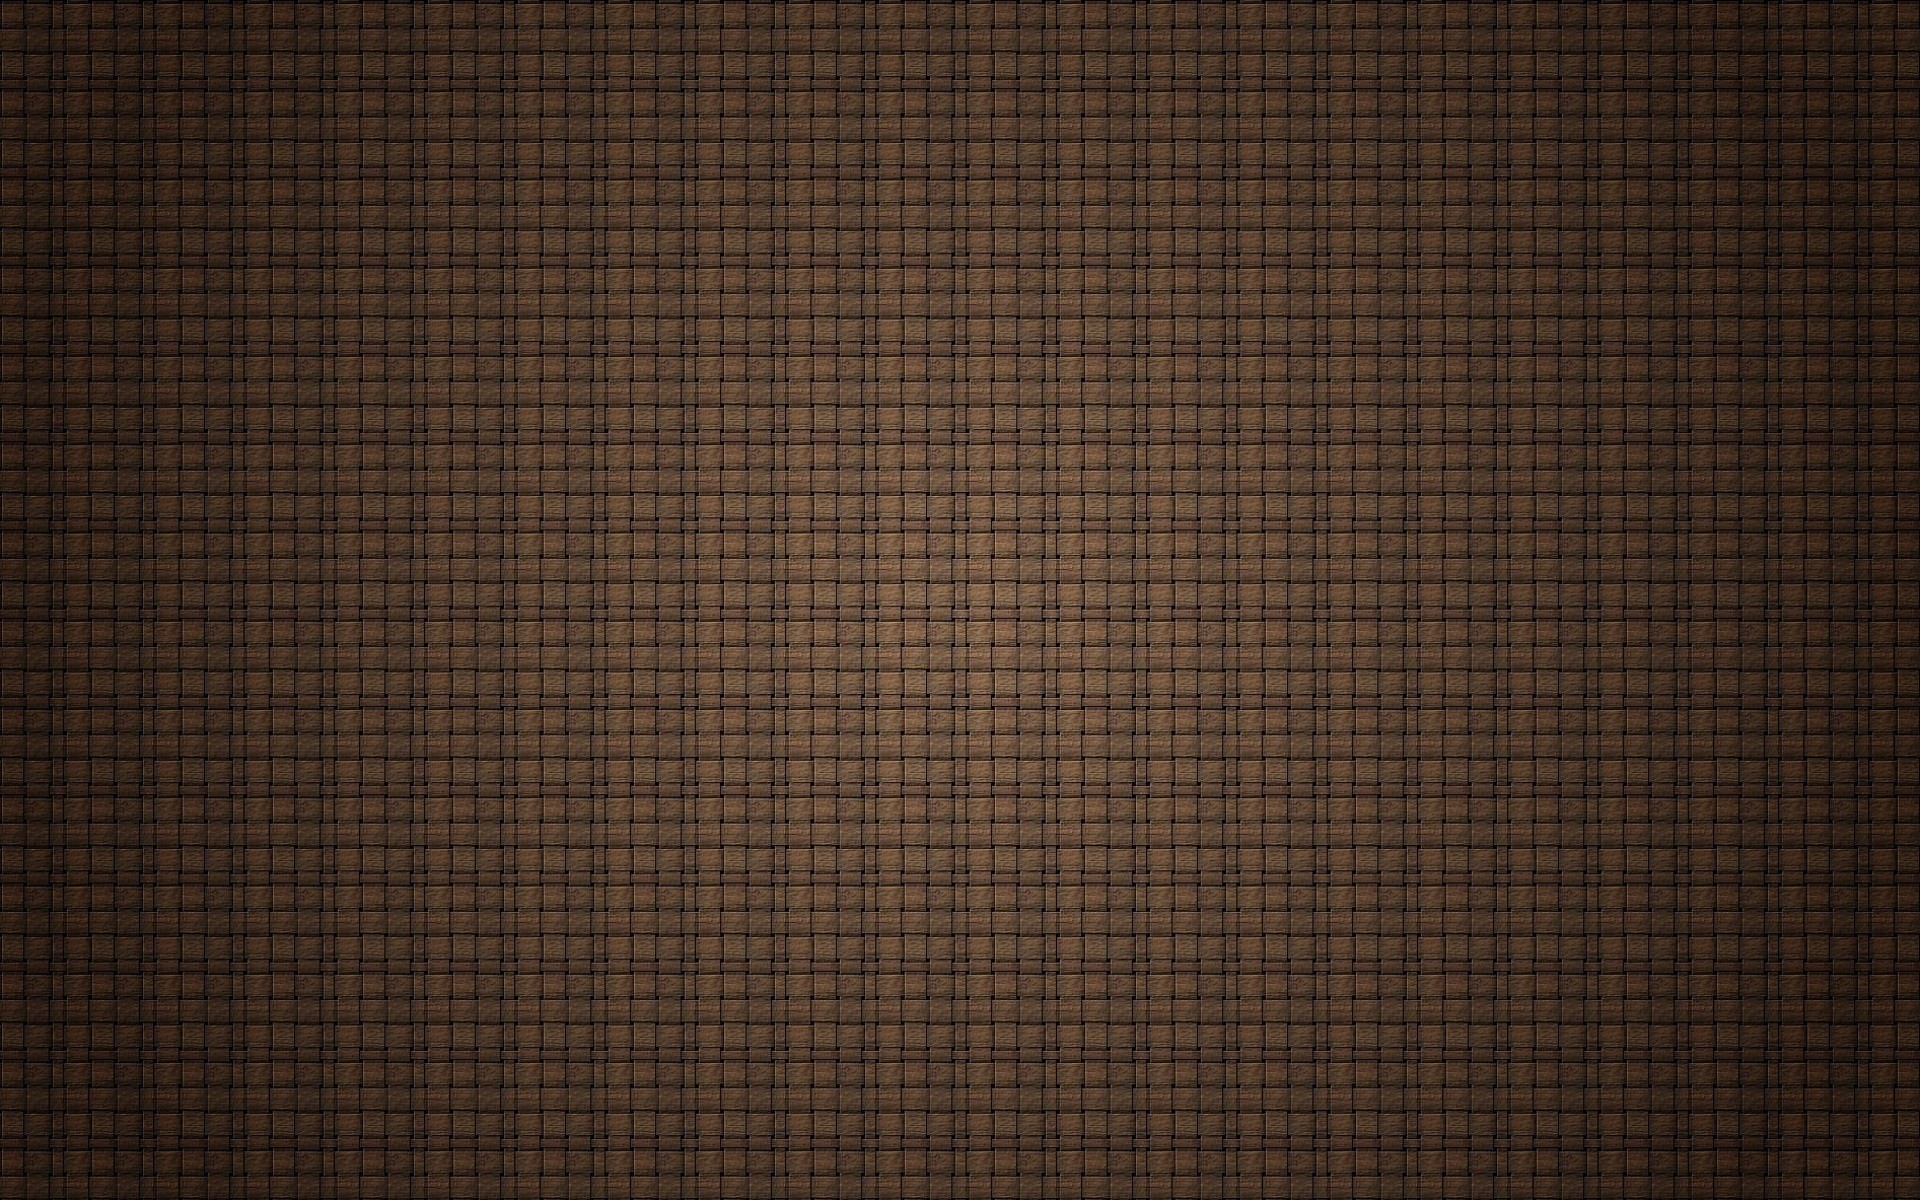 Woven Mat Brown Background Wallpapers And Images HD Wallpapers Download Free Images Wallpaper [wallpaper981.blogspot.com]